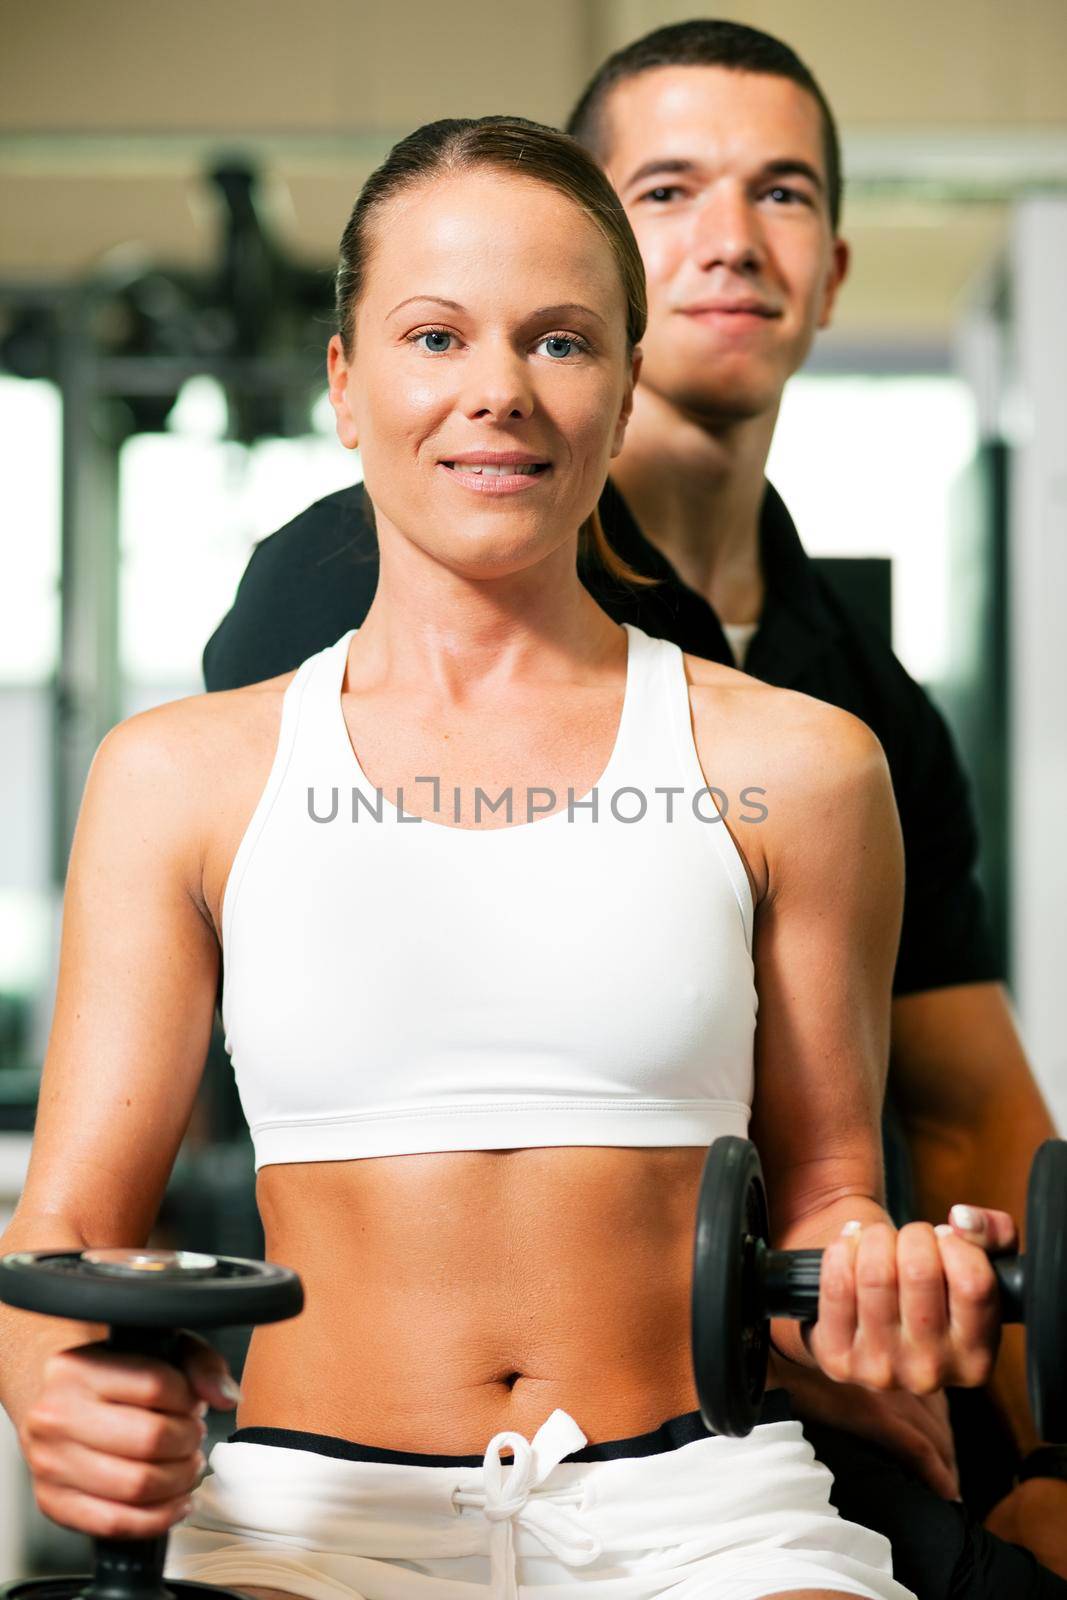 Personal Trainer in gym by Kzenon